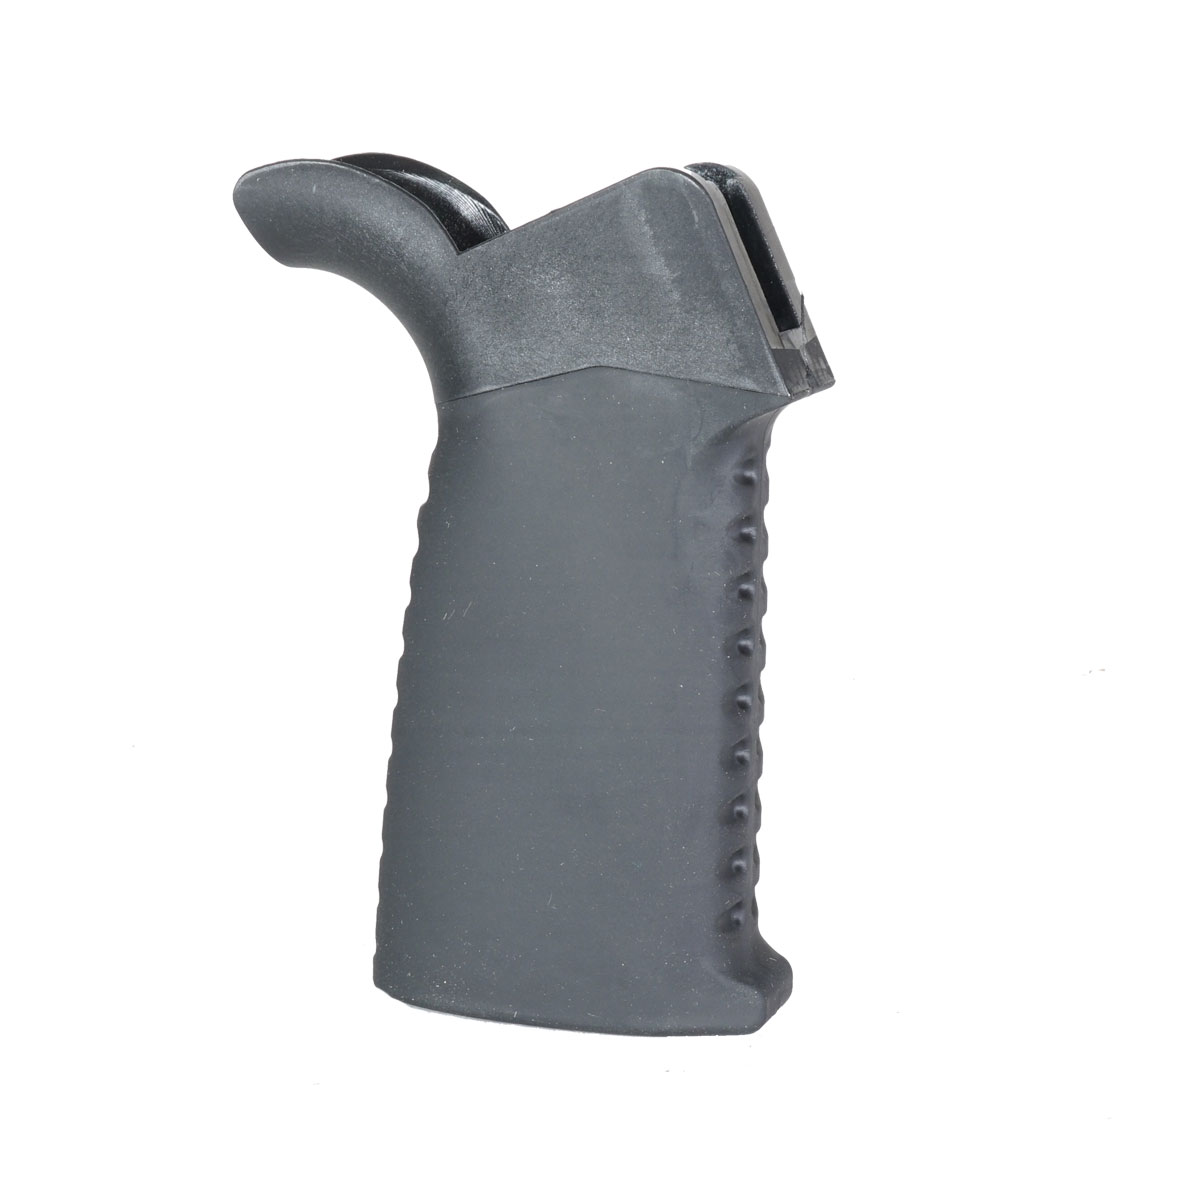 Team Accessories Corp. AR15 Grip Window Grip Flared Smooth/Ribbed Gray